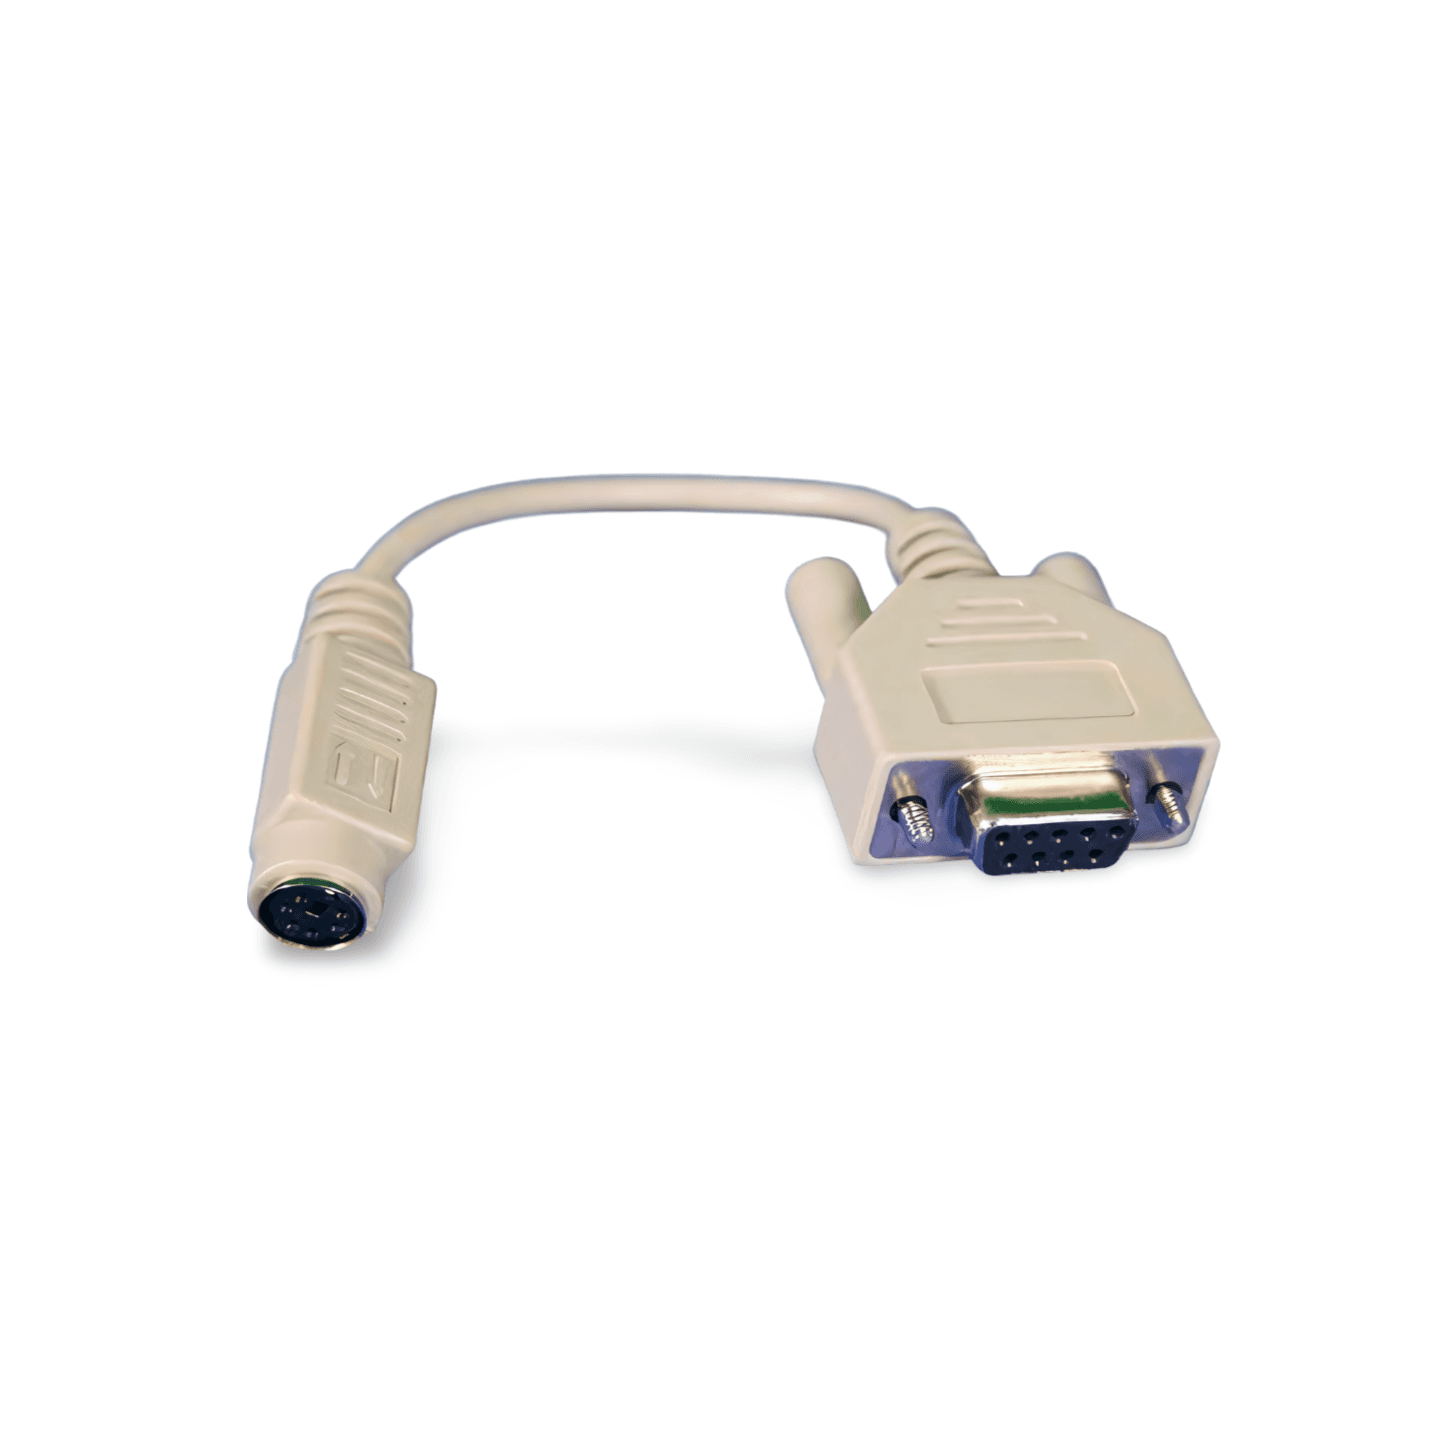 5in PS2 Female to DB9 Female Serial Port Adapter Cable beige